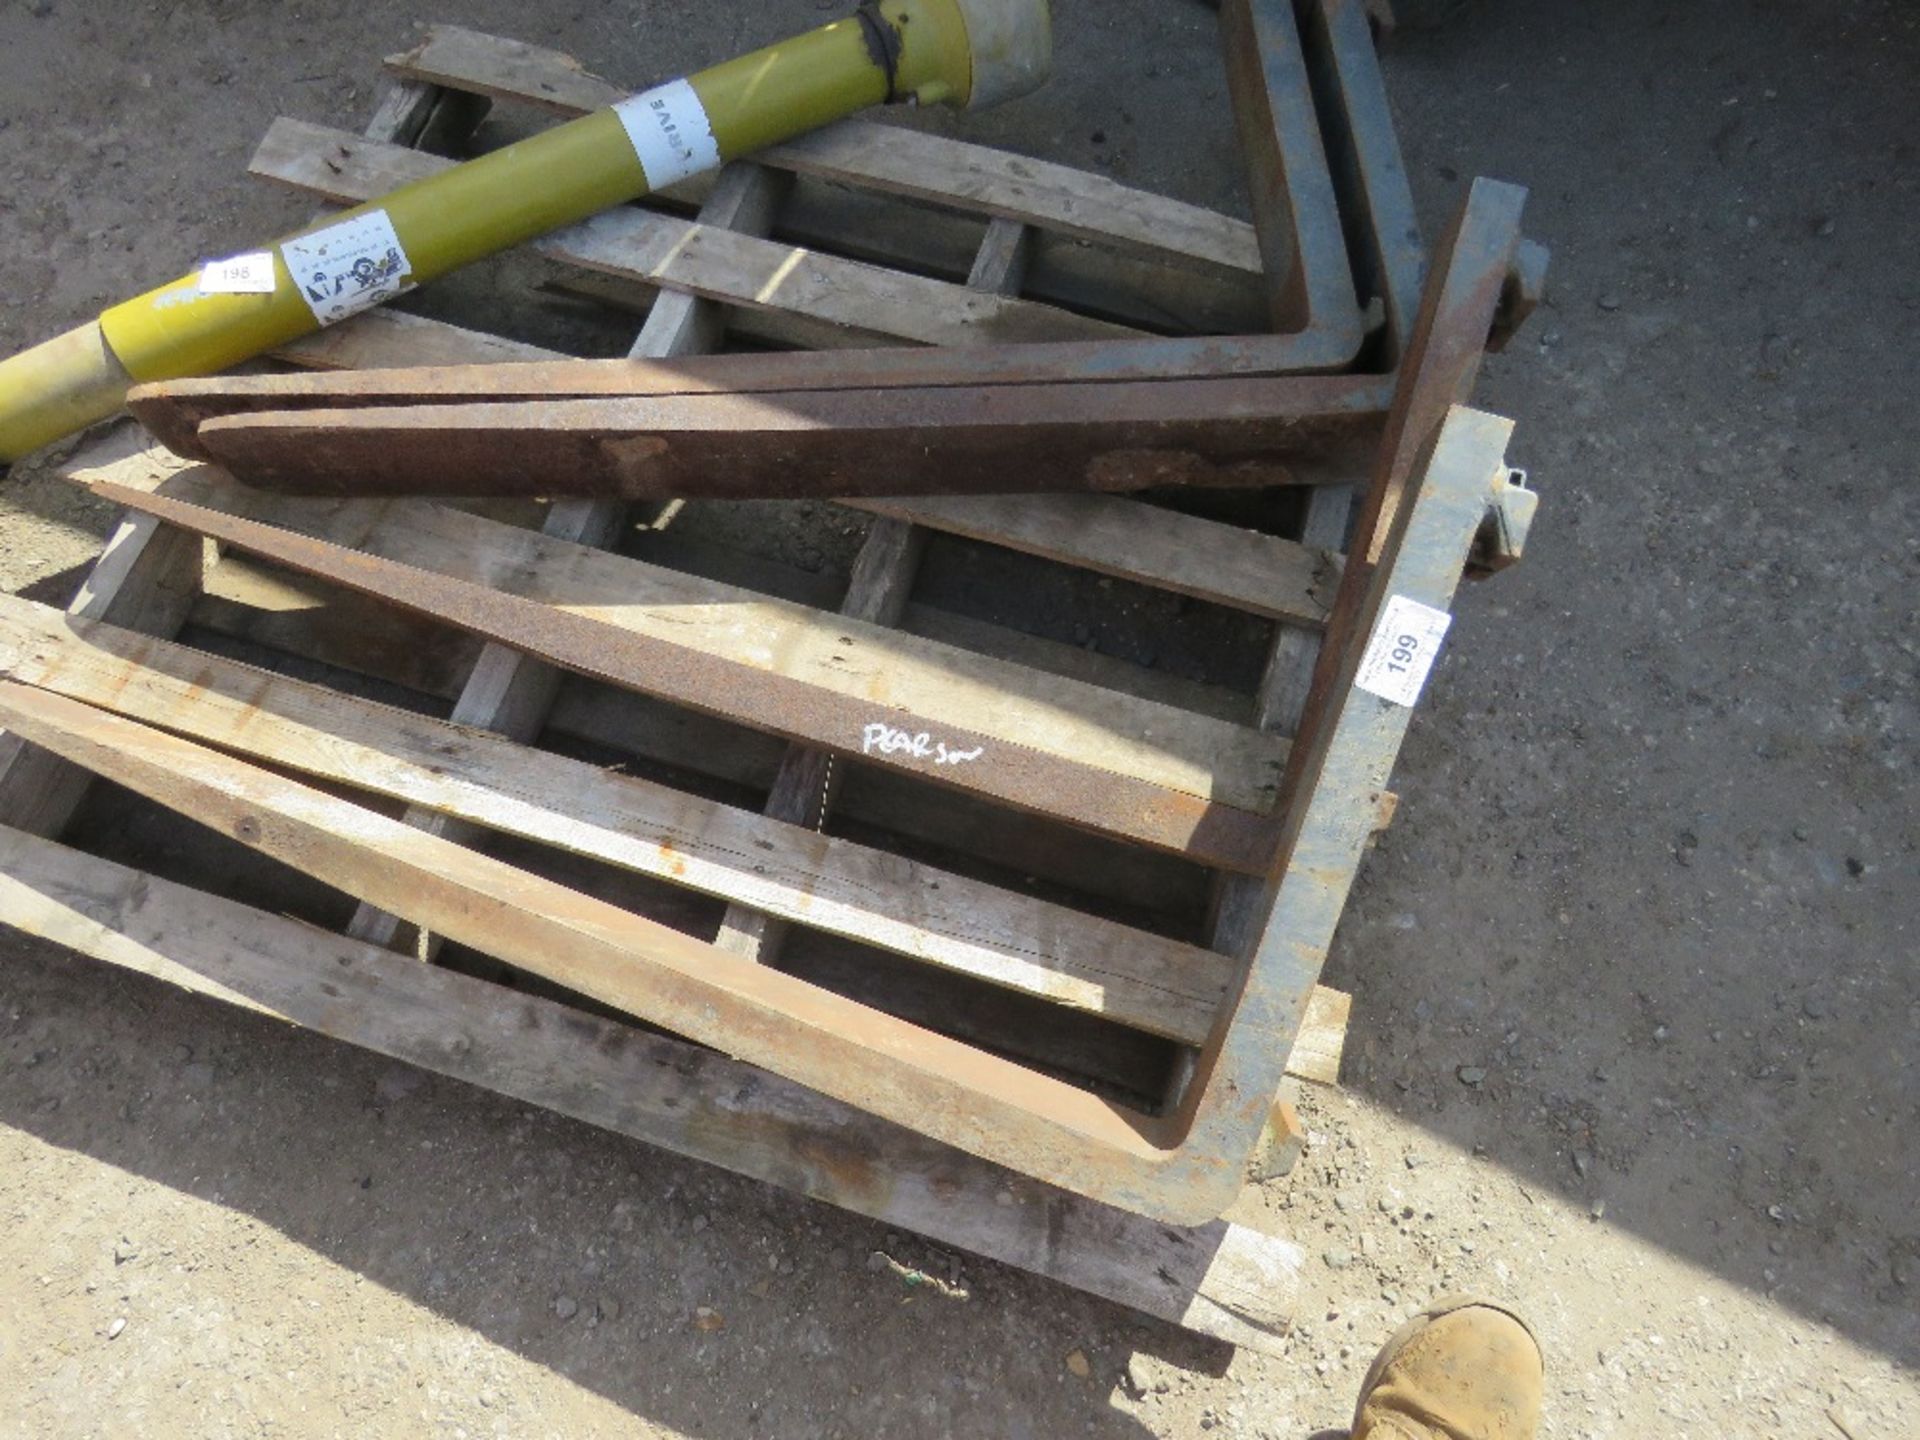 2 X PAIRS OF FORKLIFT TINES, UNTESTED